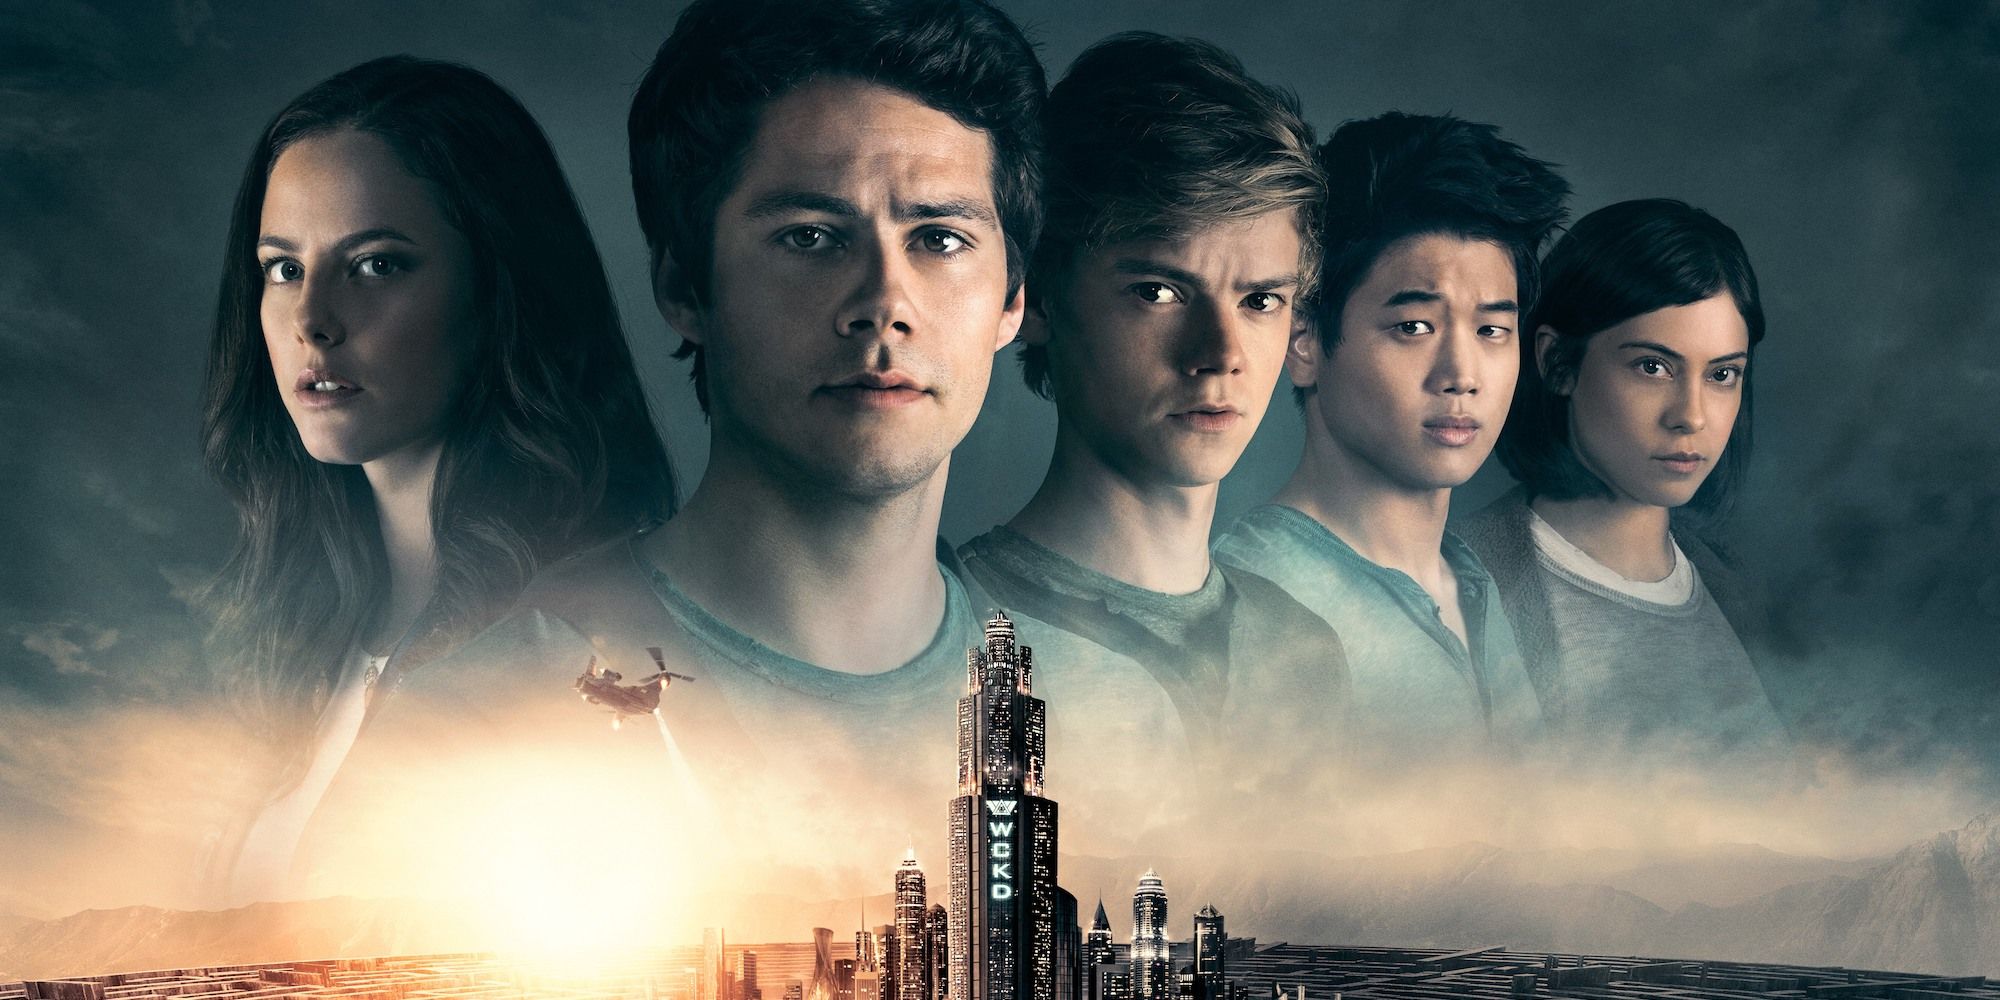 Does Maze Runner: The Death Cure Have a Post-Credits Scene?